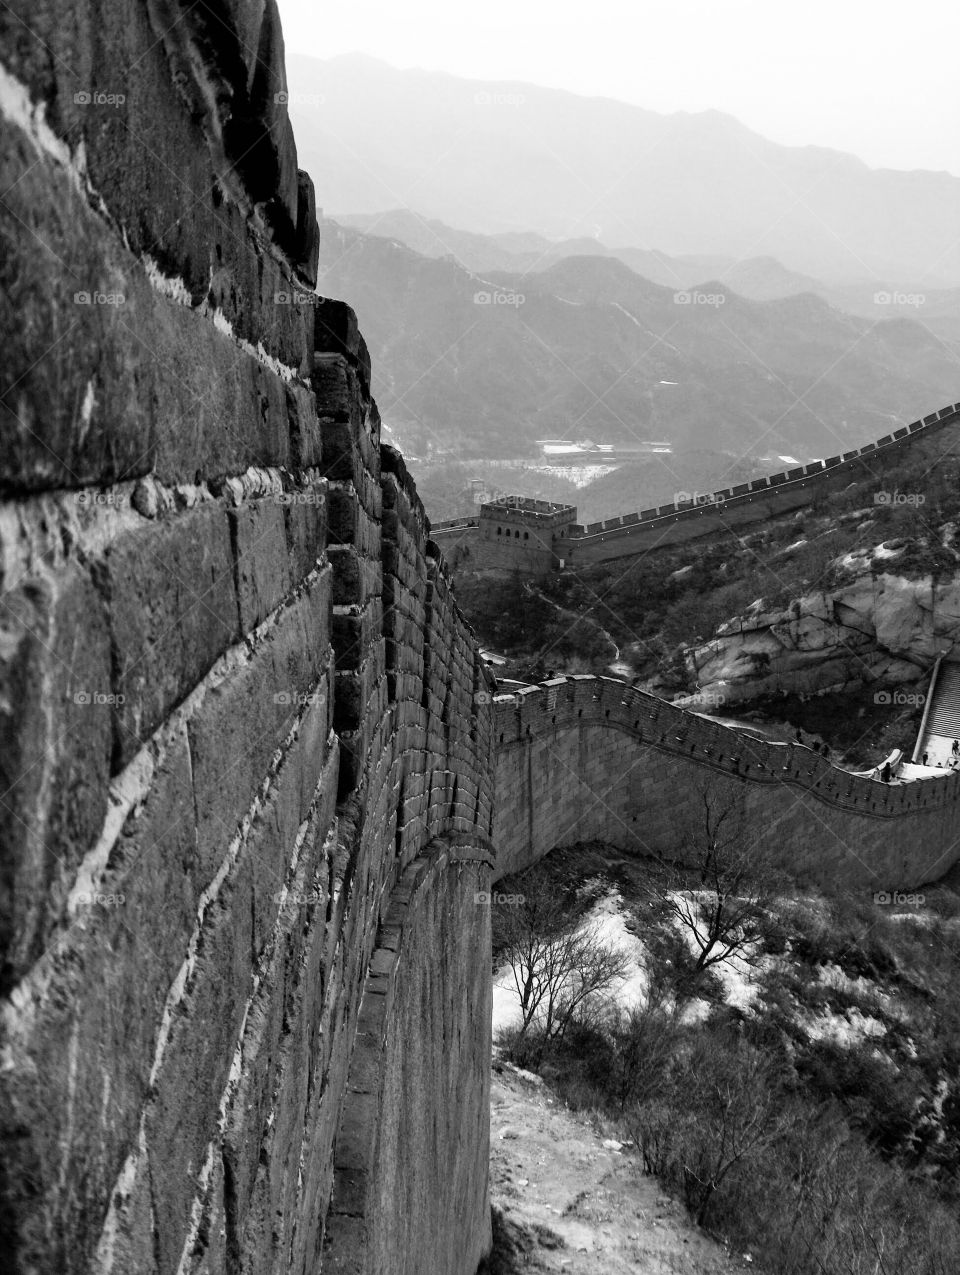 Touristy part of The Great Wall in Beijing 